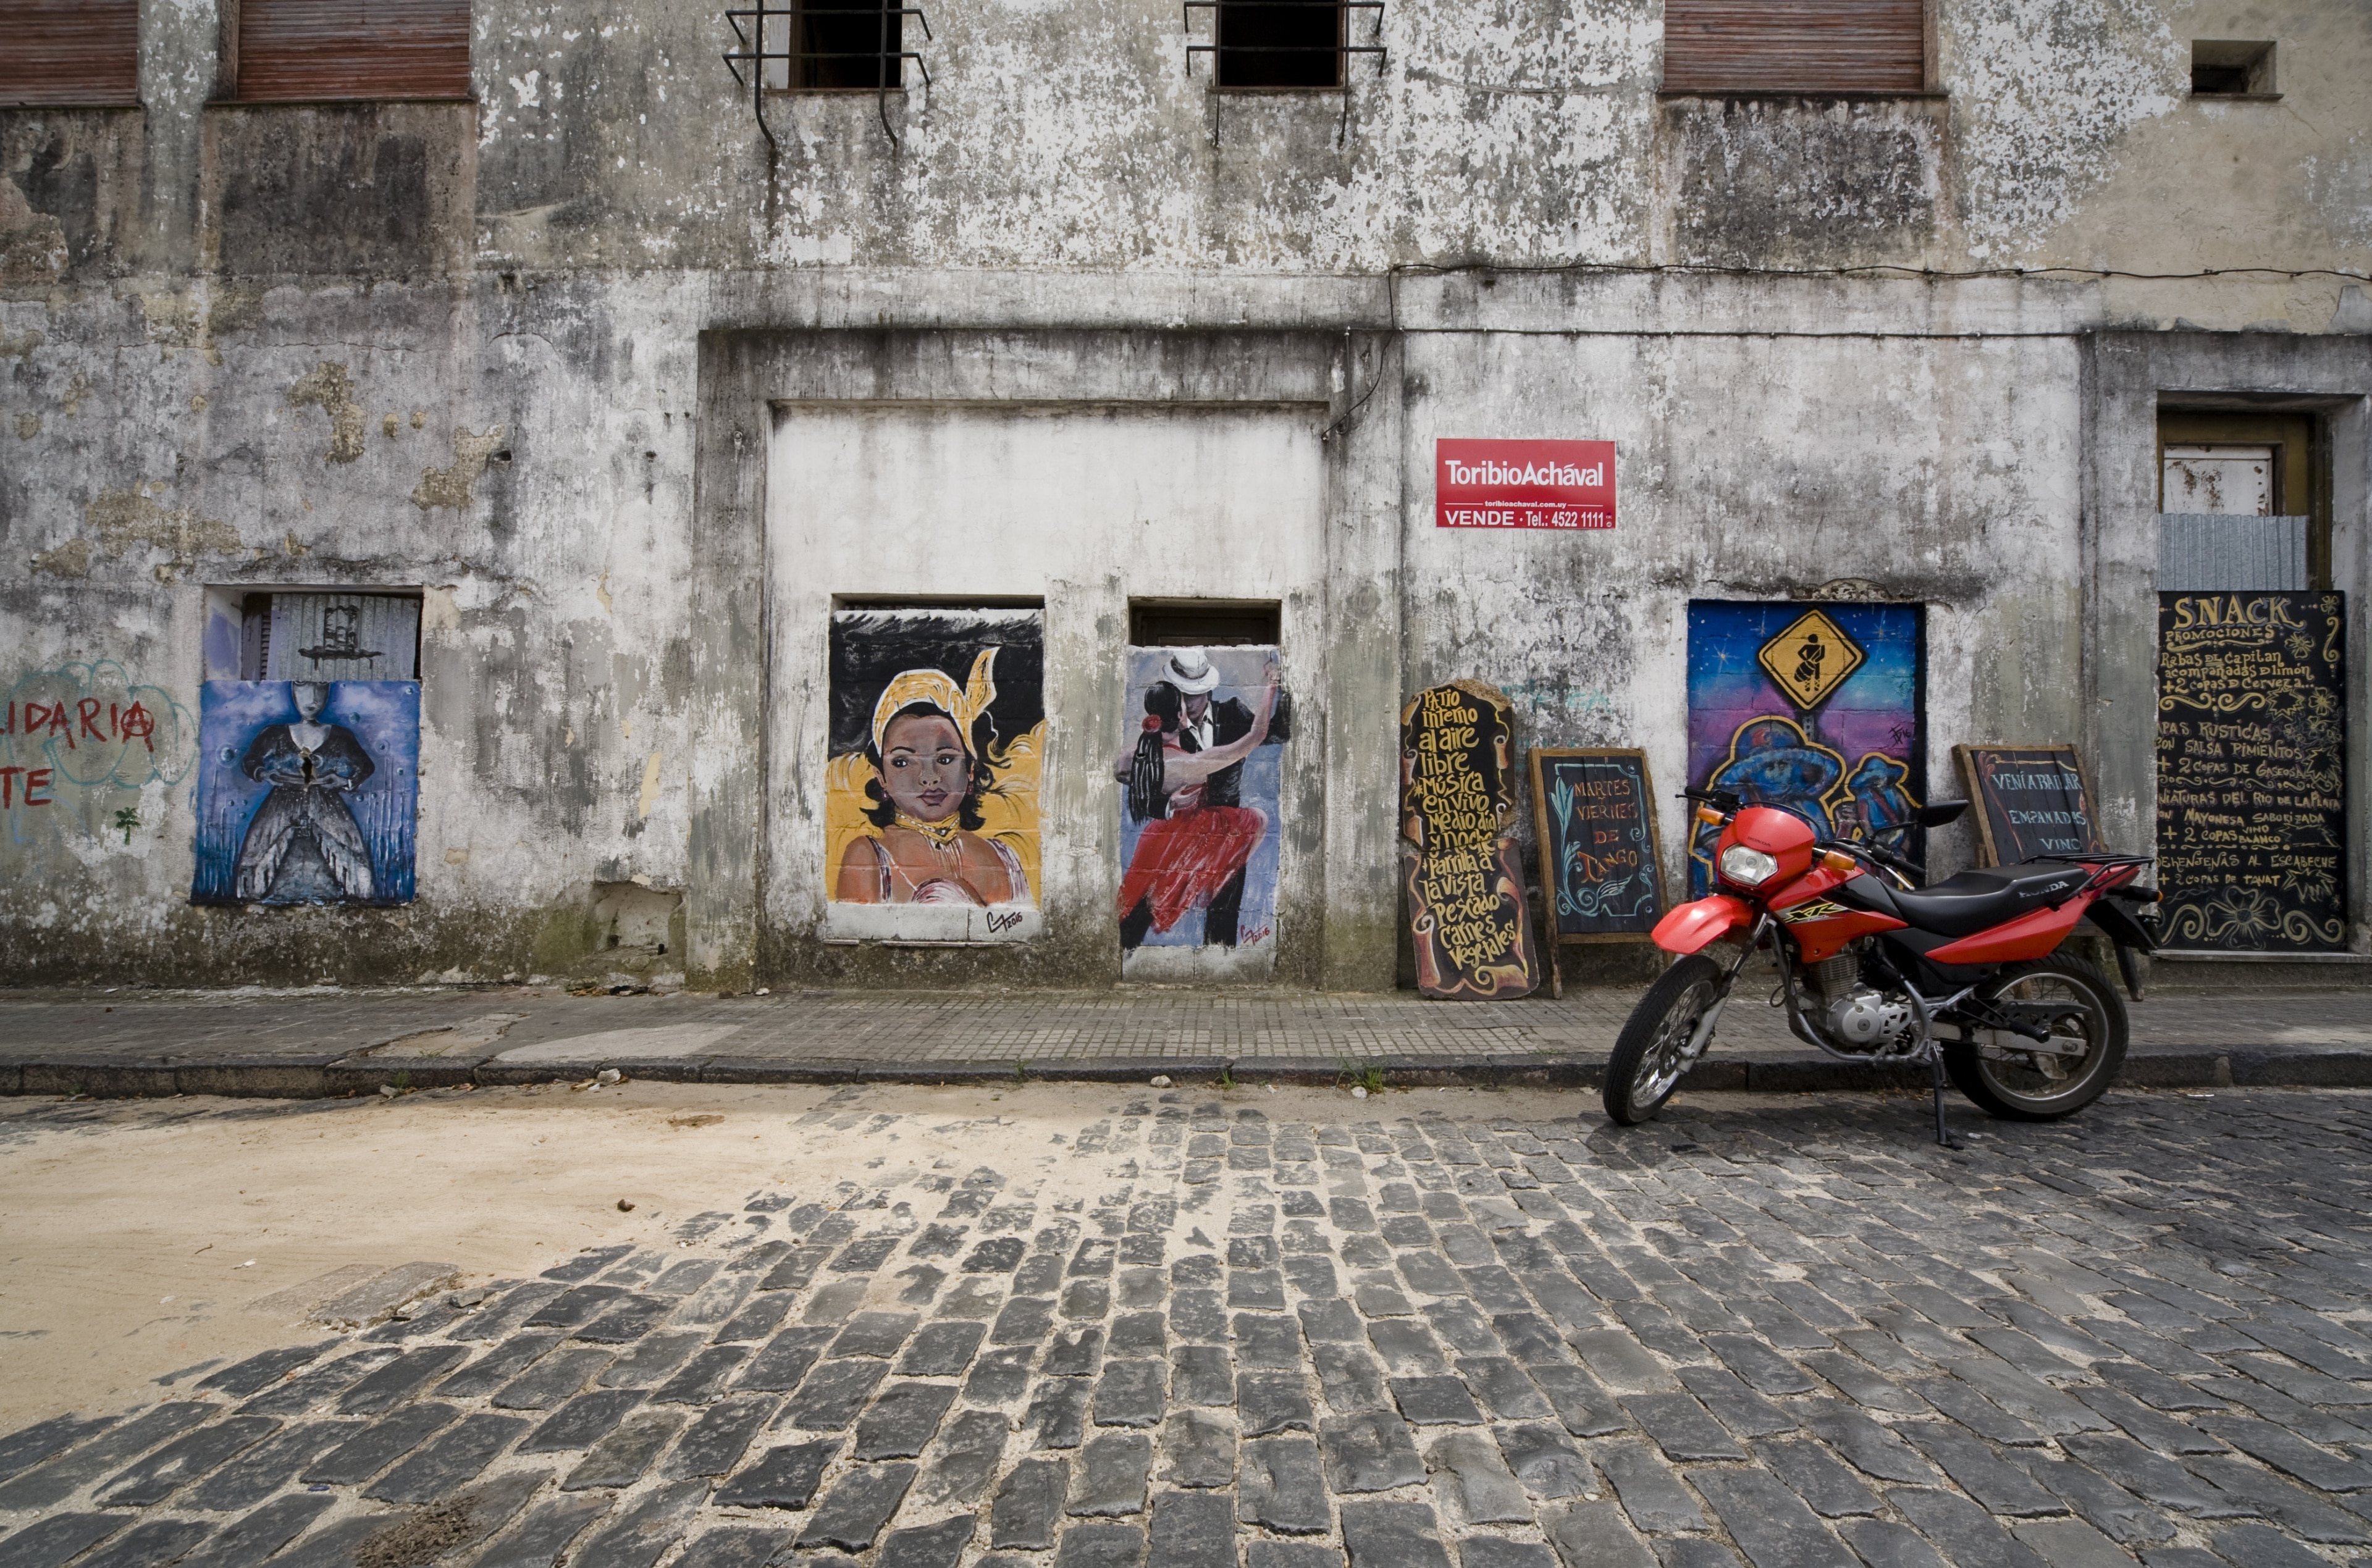 Street art Colonia Uruguay.
A short trip over the Rio Plata,from Buenos Aires lies the sleepy backwater of Colonia Uruguay. In sharp contrast to Argentina's Capital The Barrio Historico , "founded 1680", is a UNESCO World Heritage site.

#Culture #Adventure